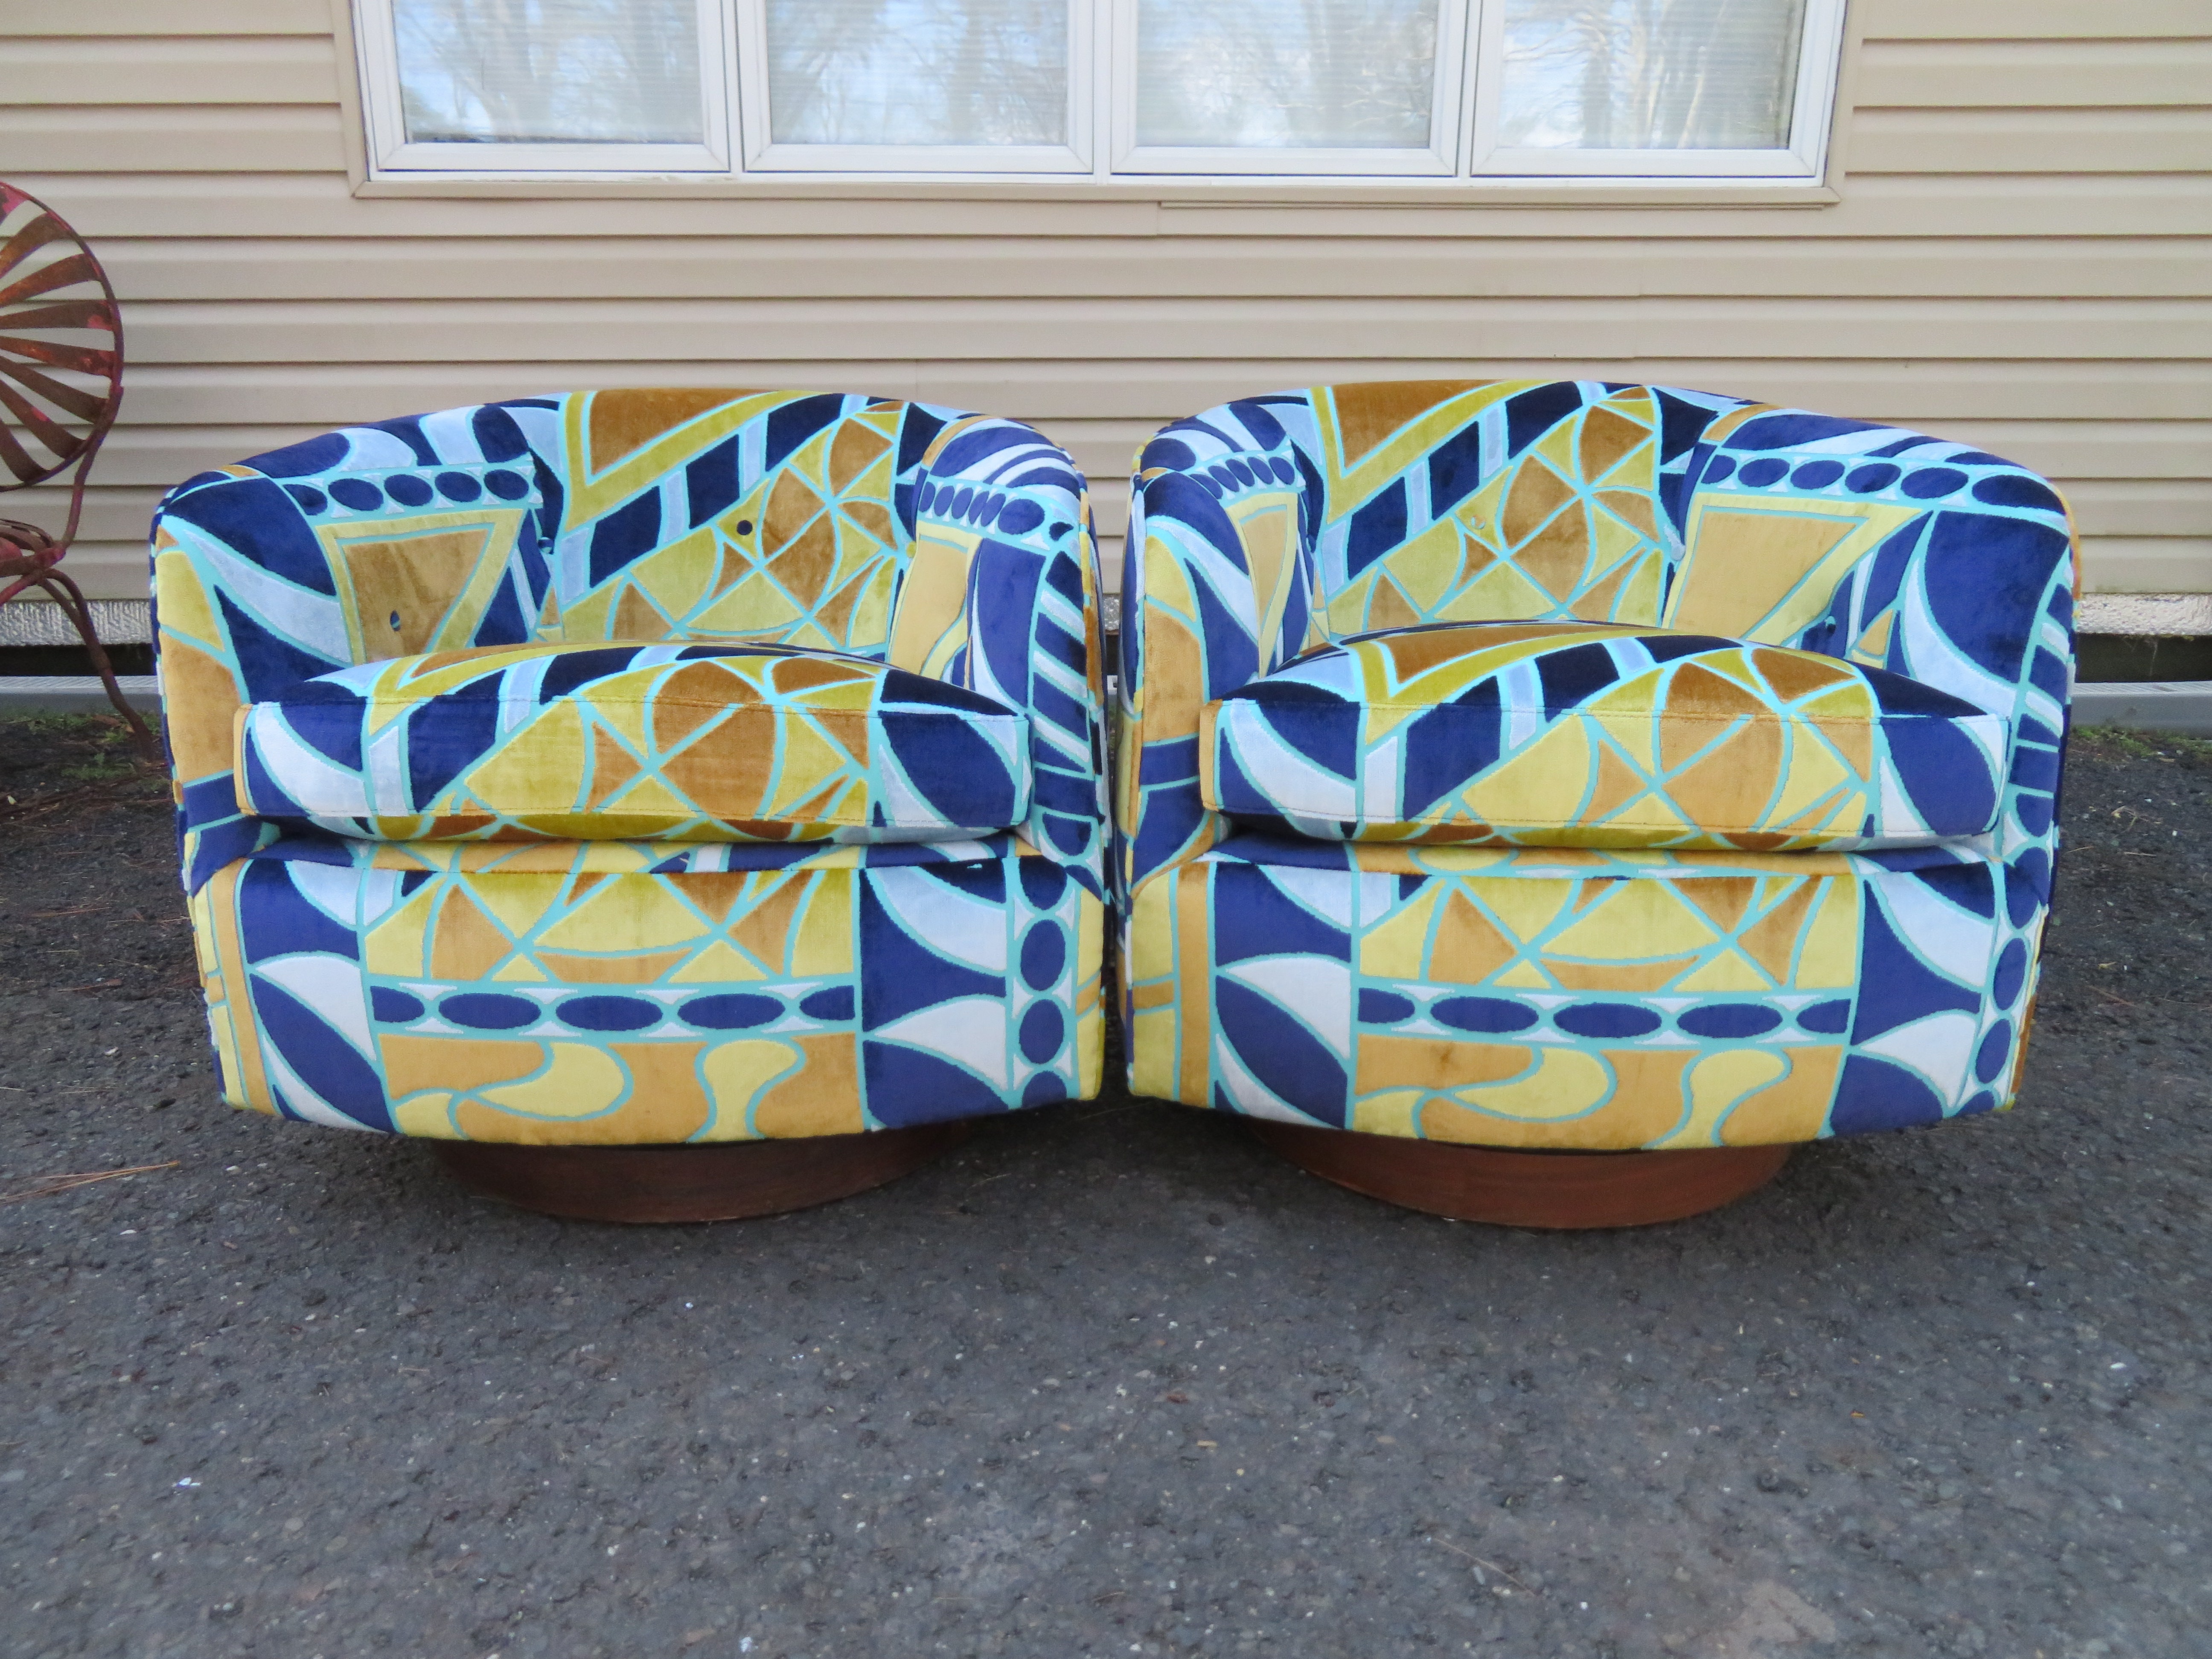 Magnificent pair of Milo Baughman swivel rocker barrel back lounge chairs. This pair has been reupholstered in the most wonderful Pucci inspired cut velvet fabric. They are breathtaking in person and are sure to impress. They measure 25